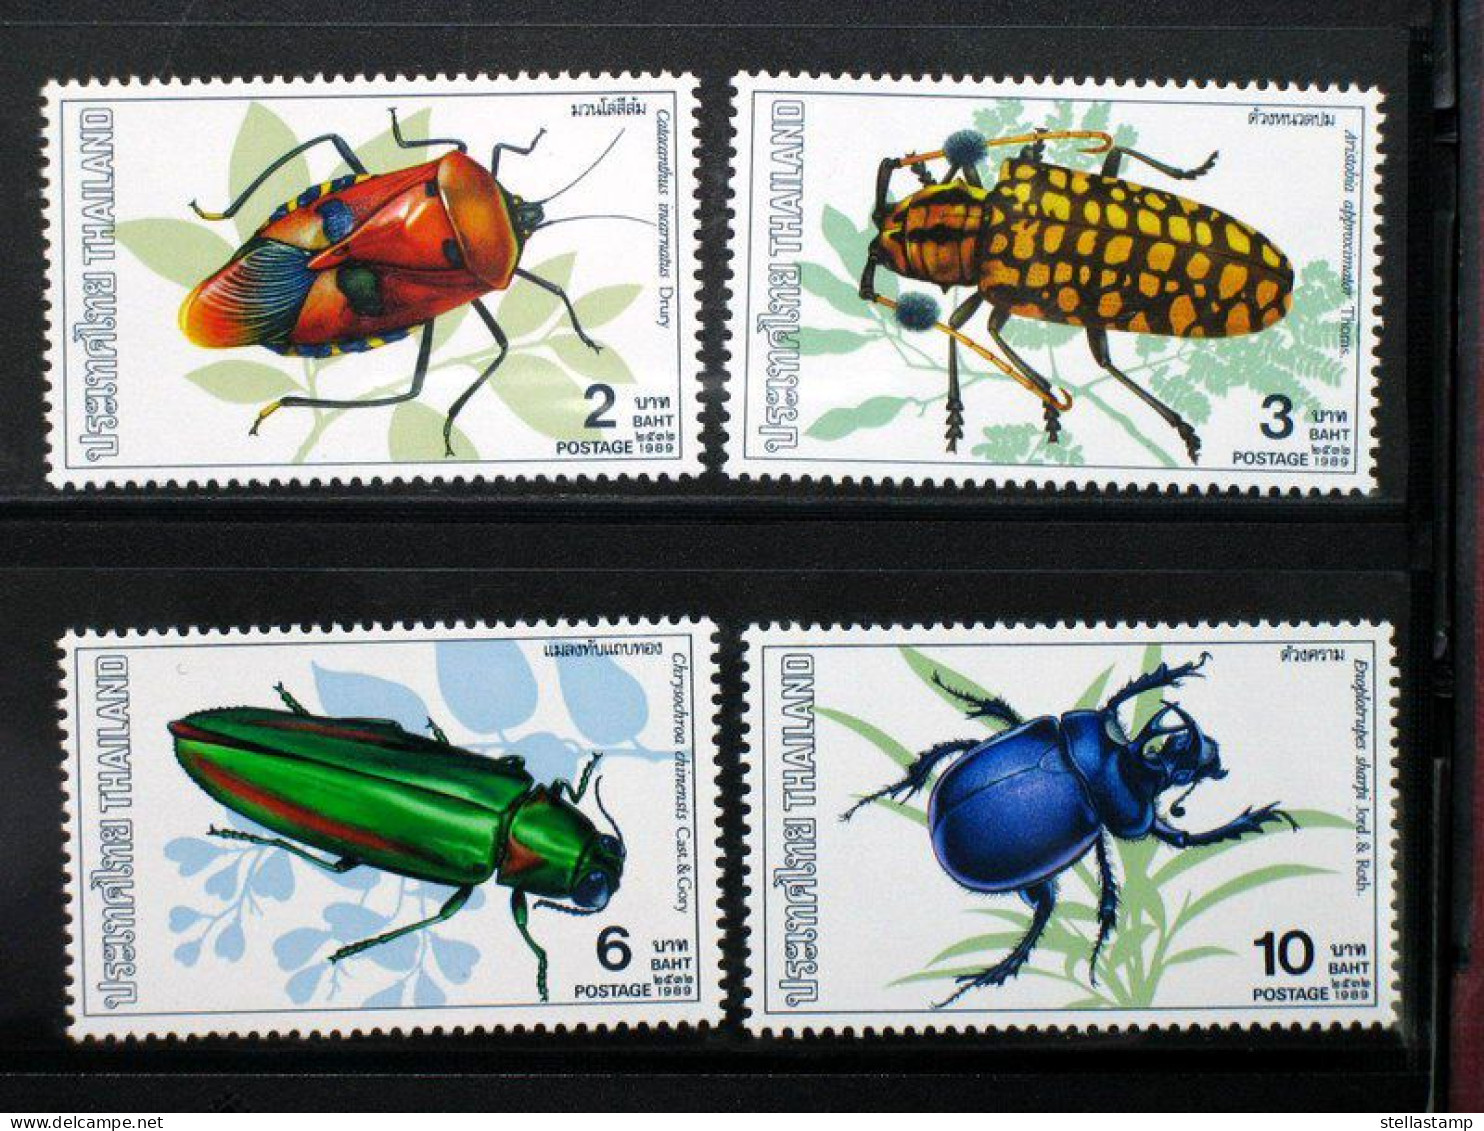 Thailand Stamp 1989 Insects 1st - Thailand